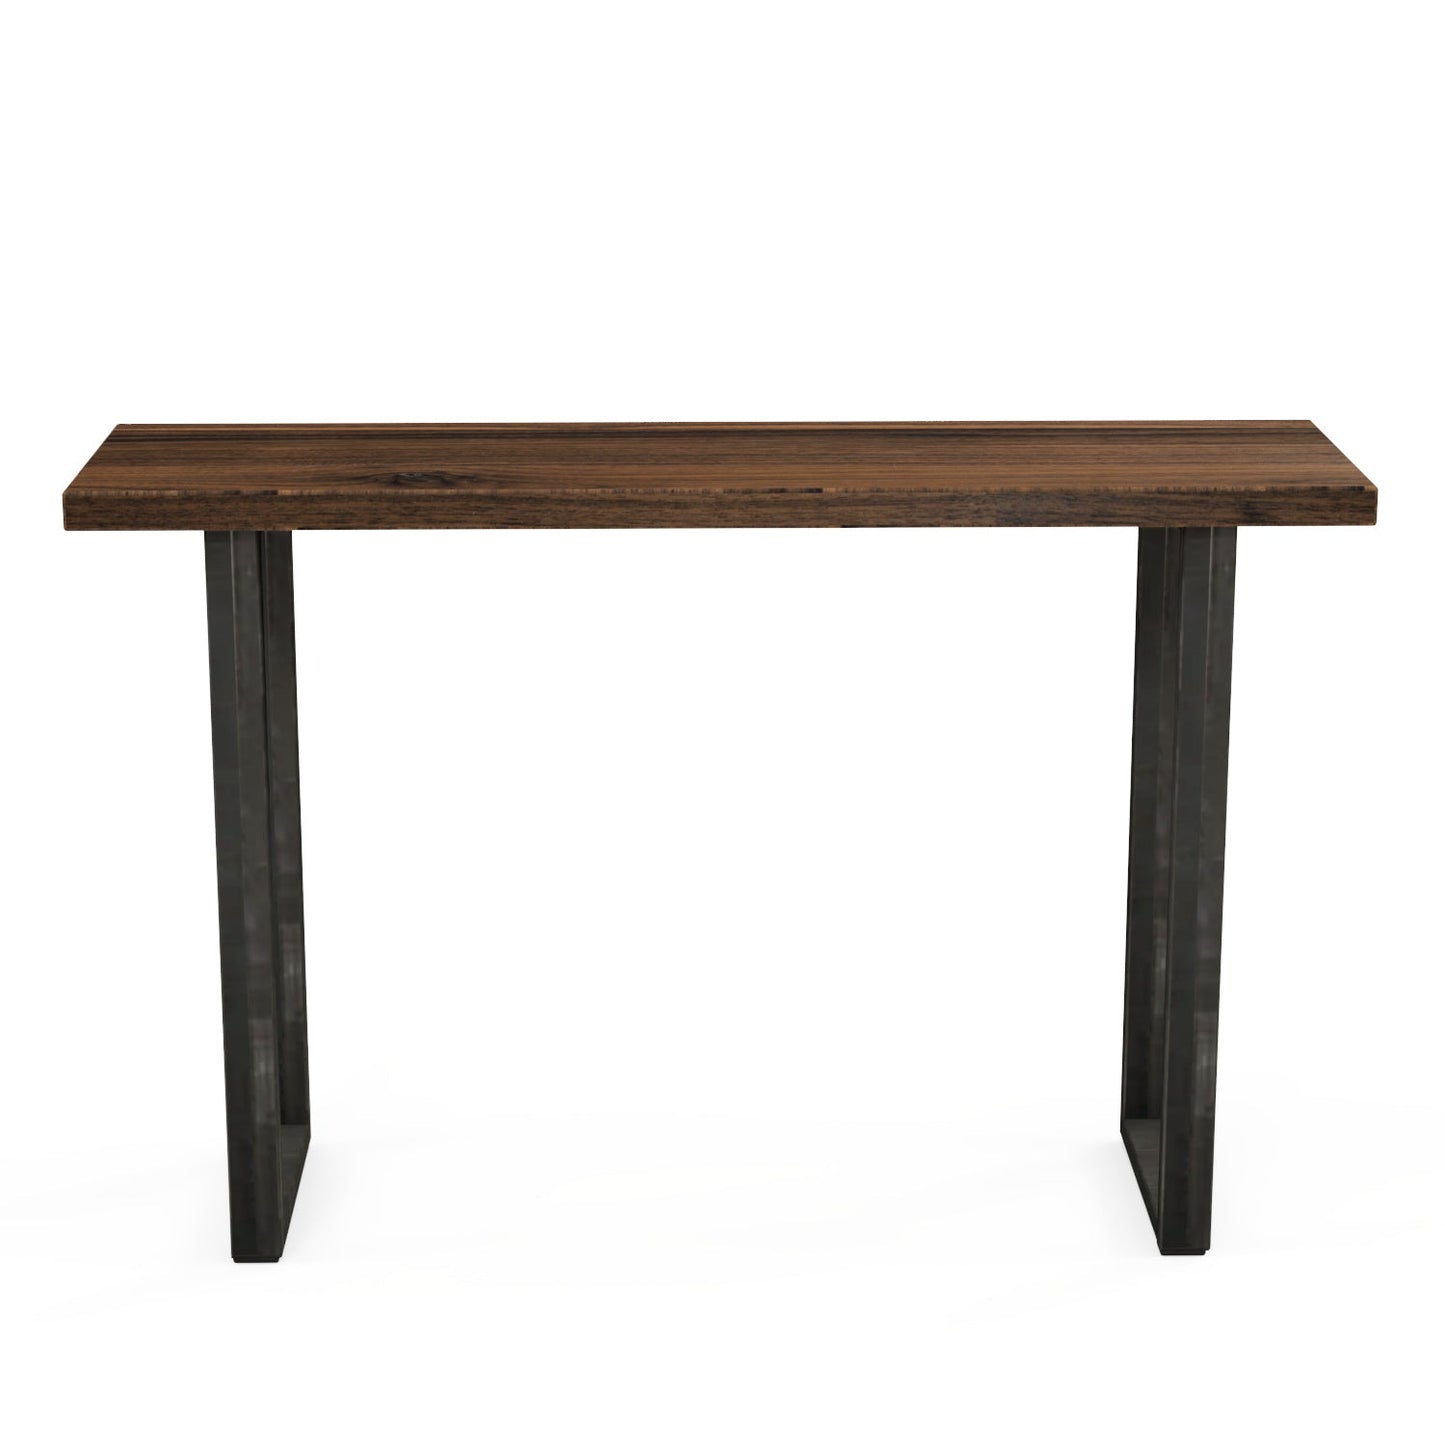 The Broadway Console Table - FargoWoodworks